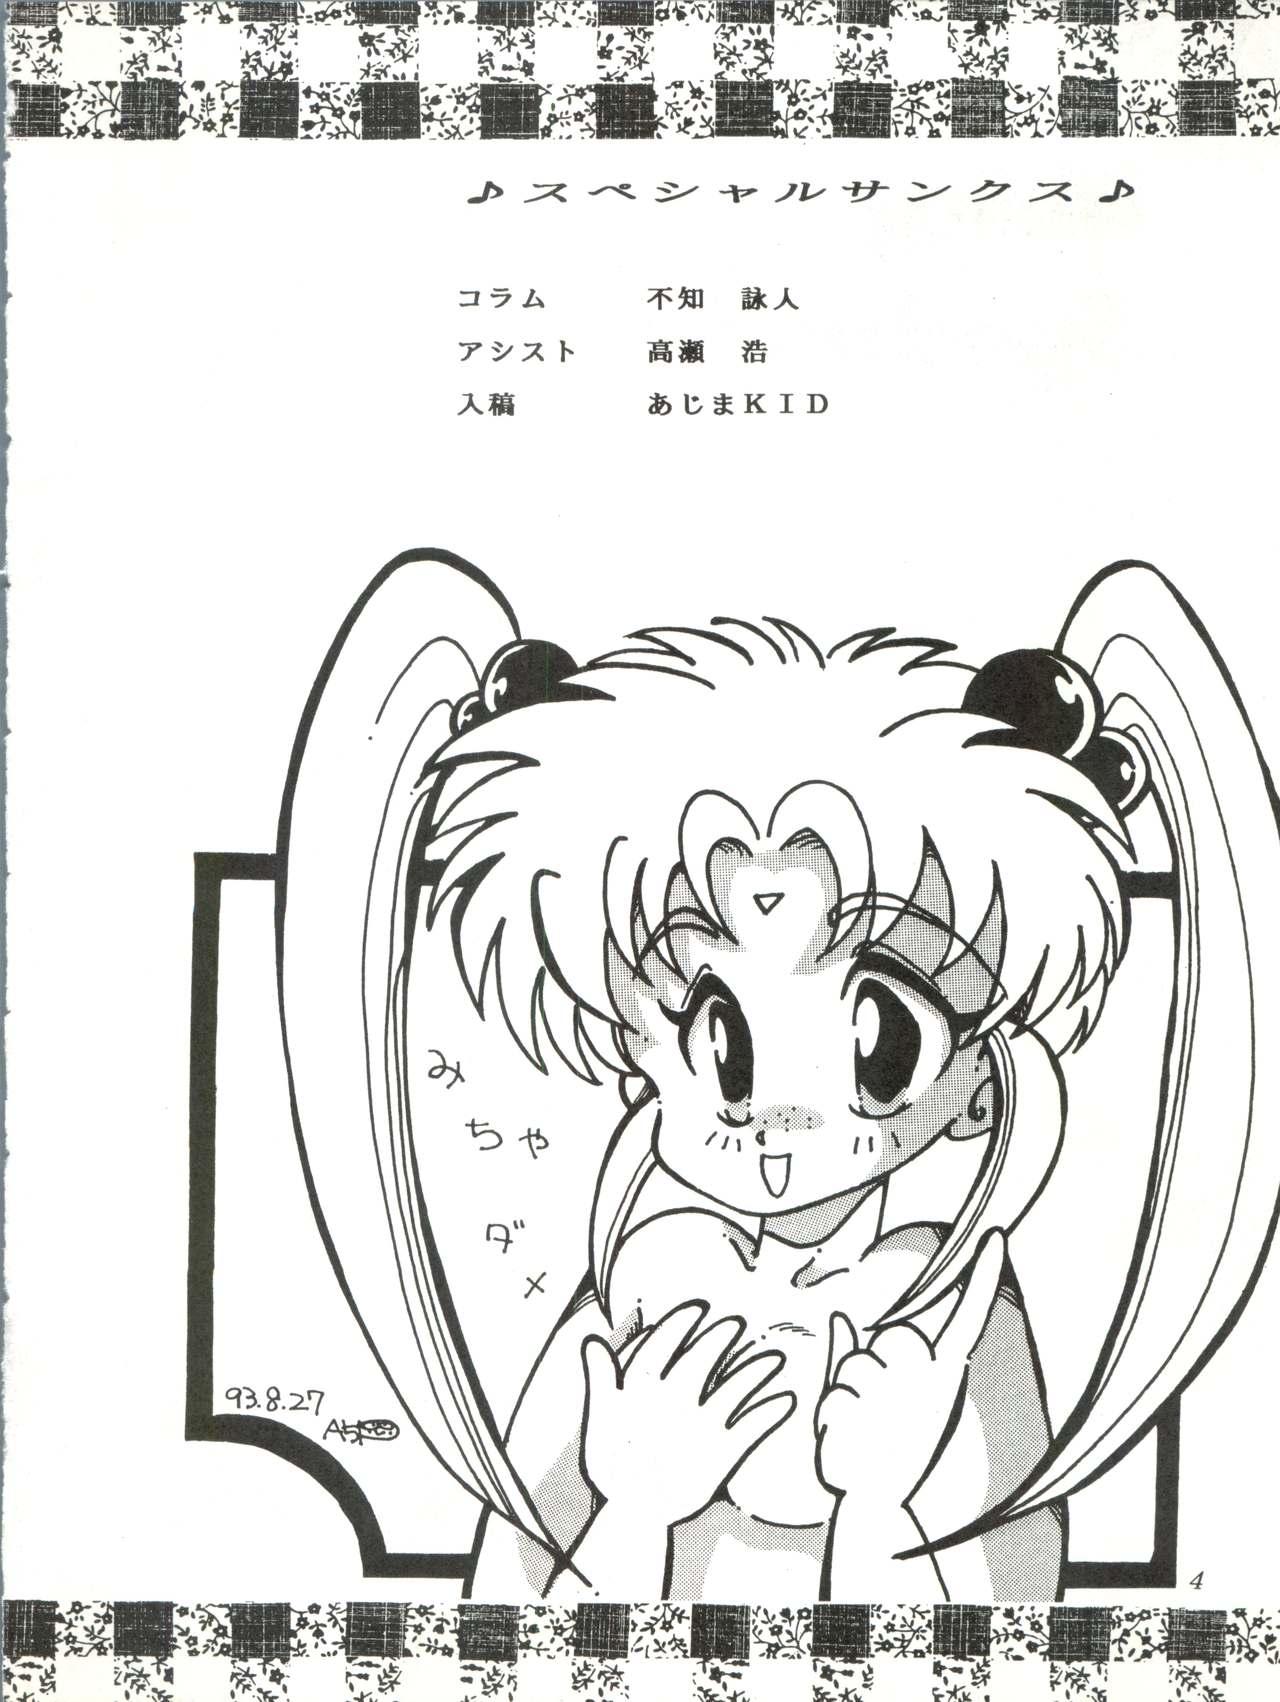 Pale Milky Syndrome EX 2 - Sailor moon Tenchi muyo Pretty sammy Ghost sweeper mikami Ng knight lamune and 40 Teentube - Page 4